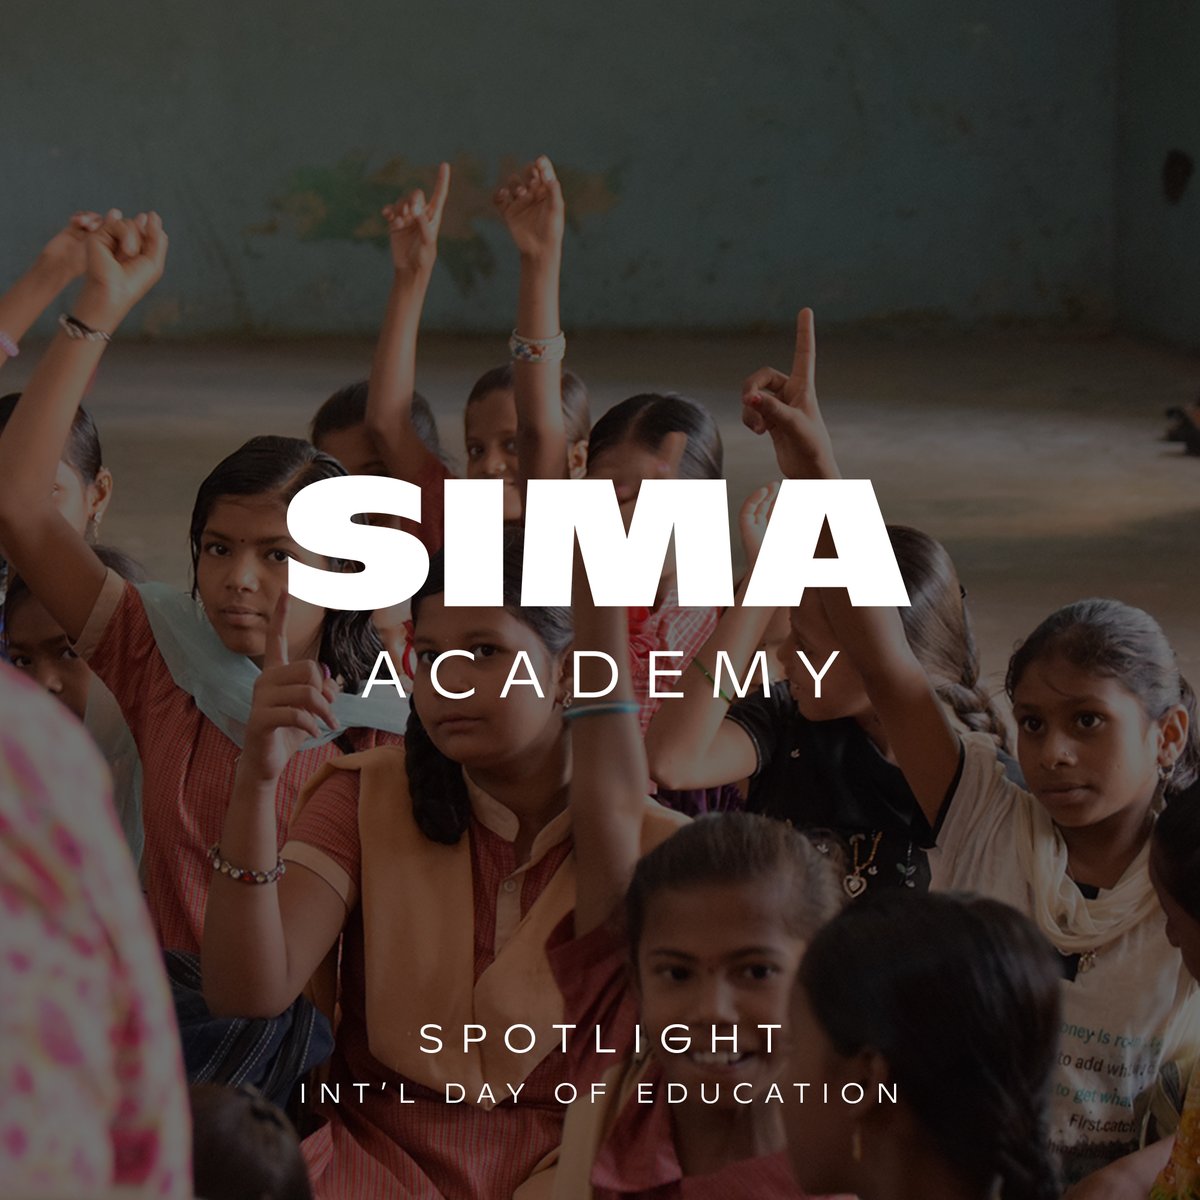 The @UN International Day of Education underpins the importance of education for global peace and development. Watch 30+ films exploring its key role in building sustainable and resilient societies in SIMA Academy. bit.ly/SIMAAcademyFea… #InternationalDayofEducation